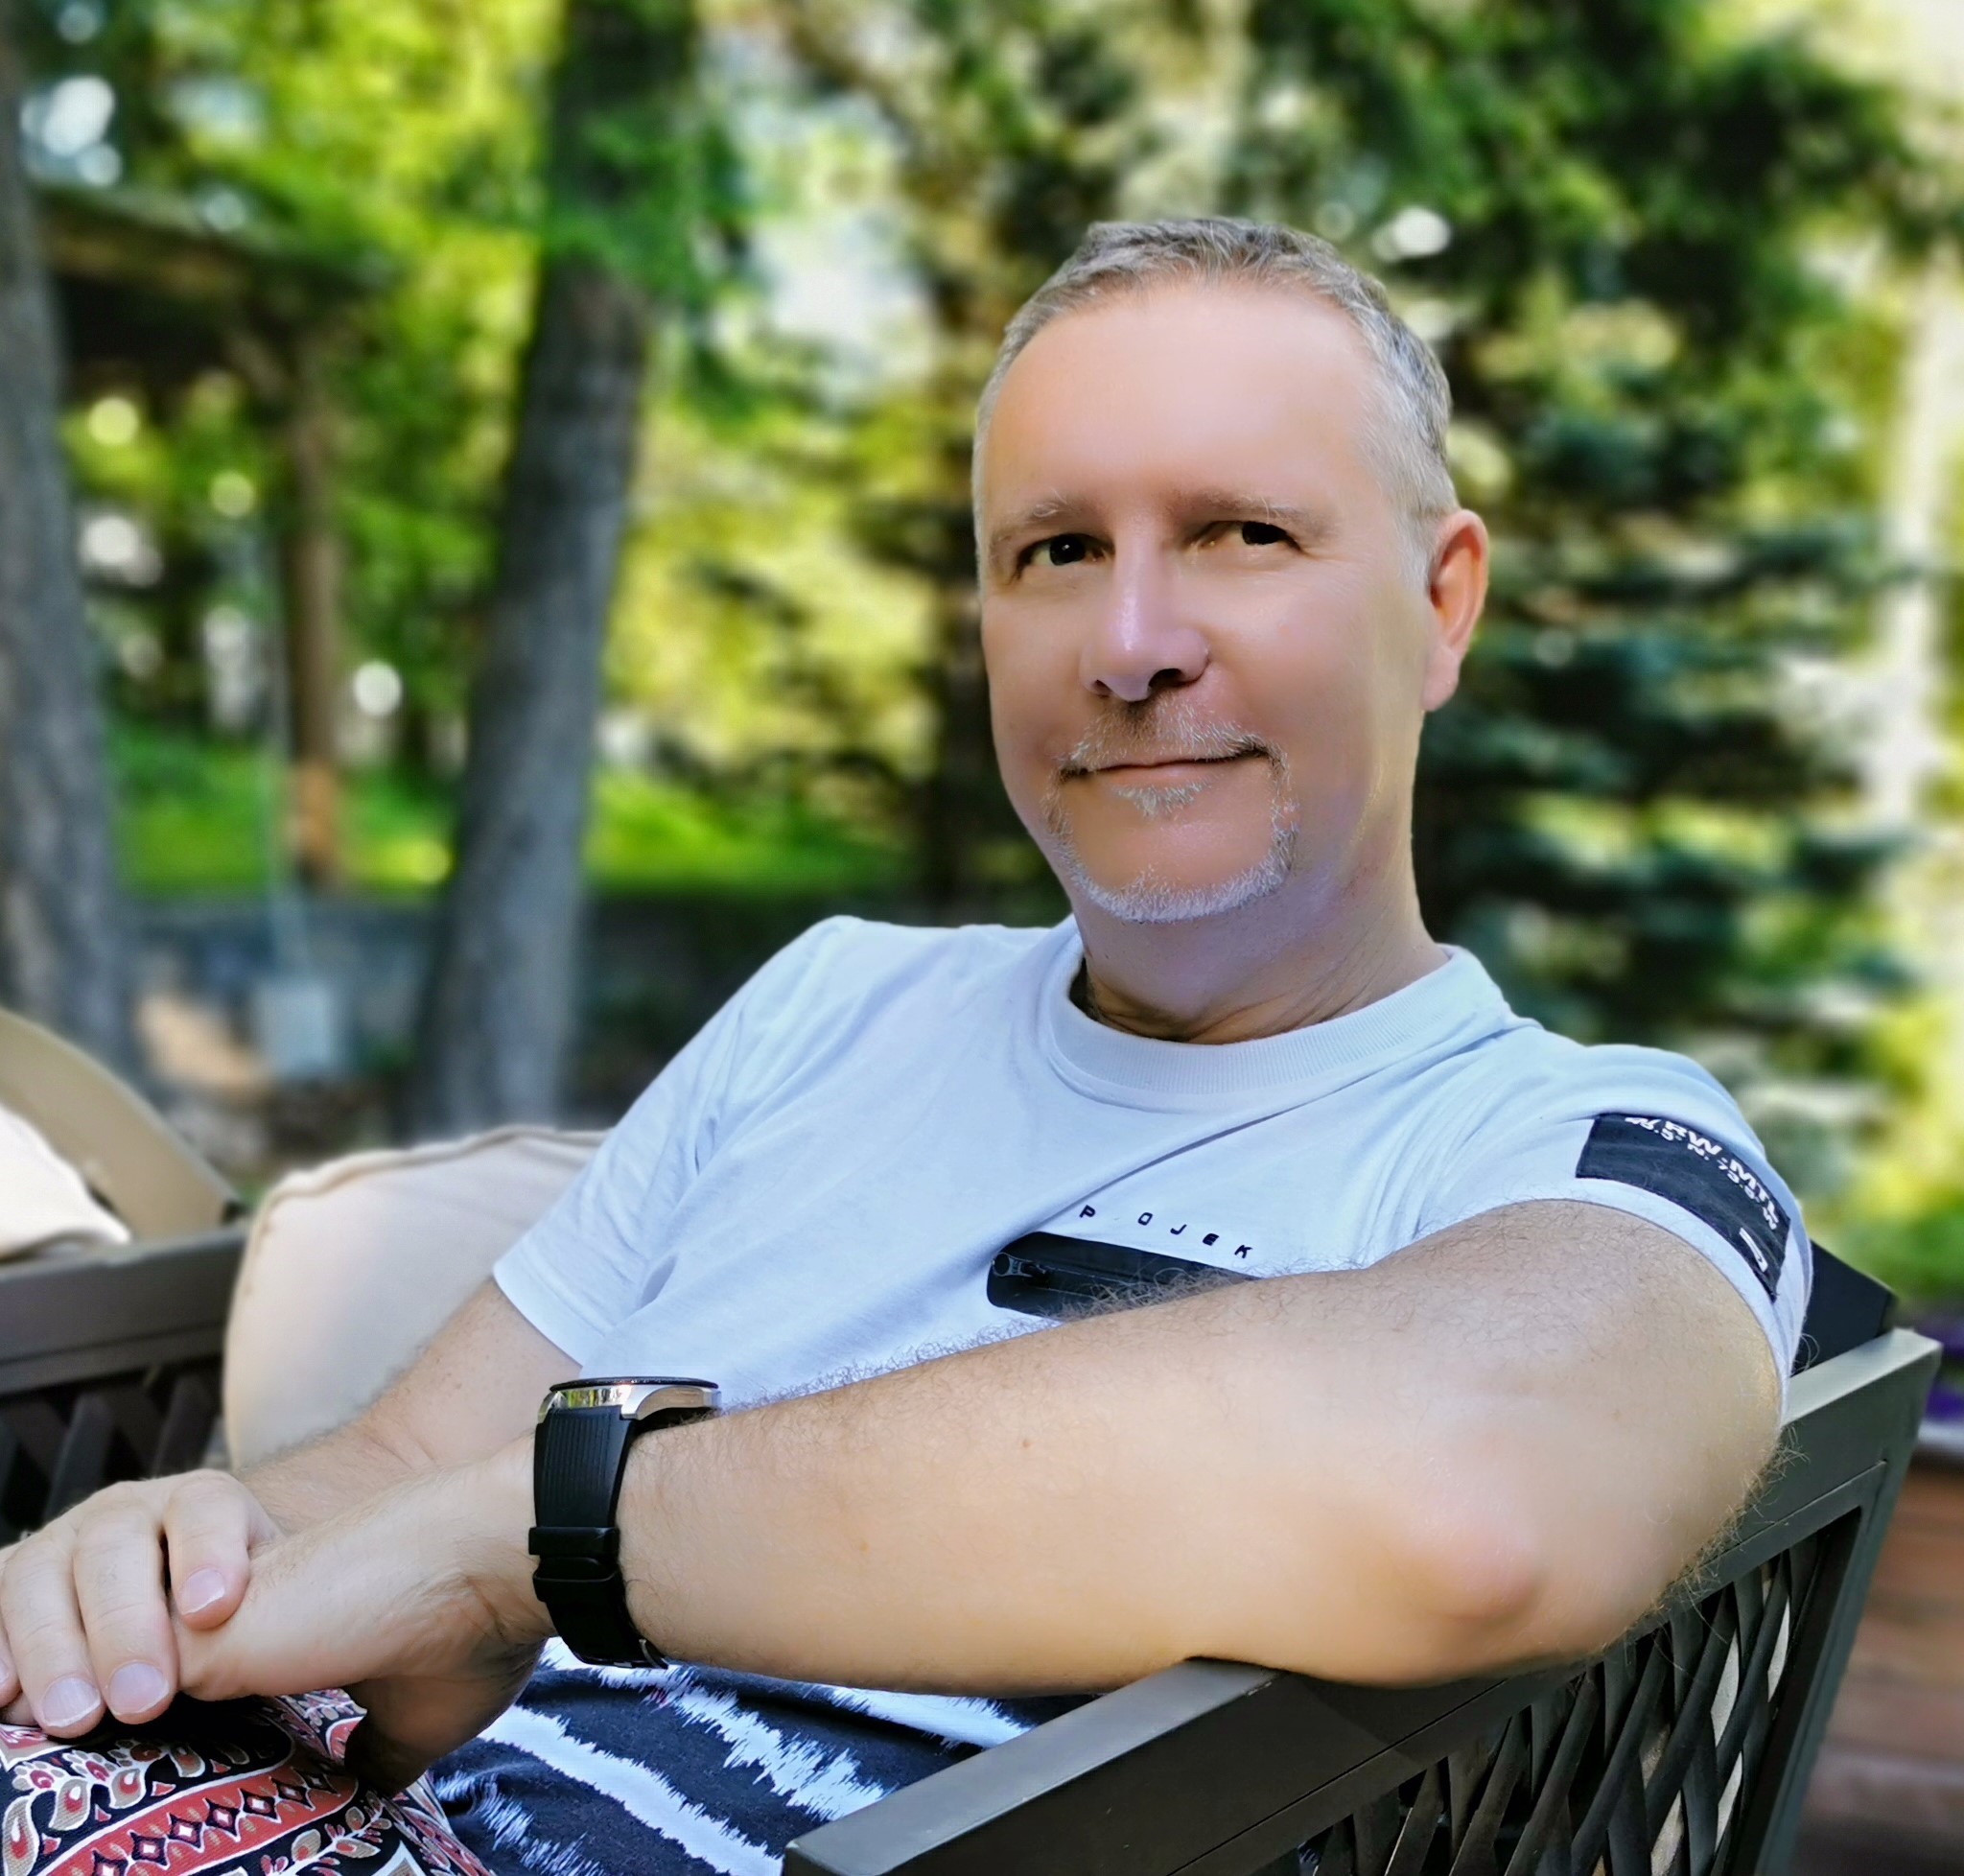 Man with grey hair sits outdoors on a chair and smiles.